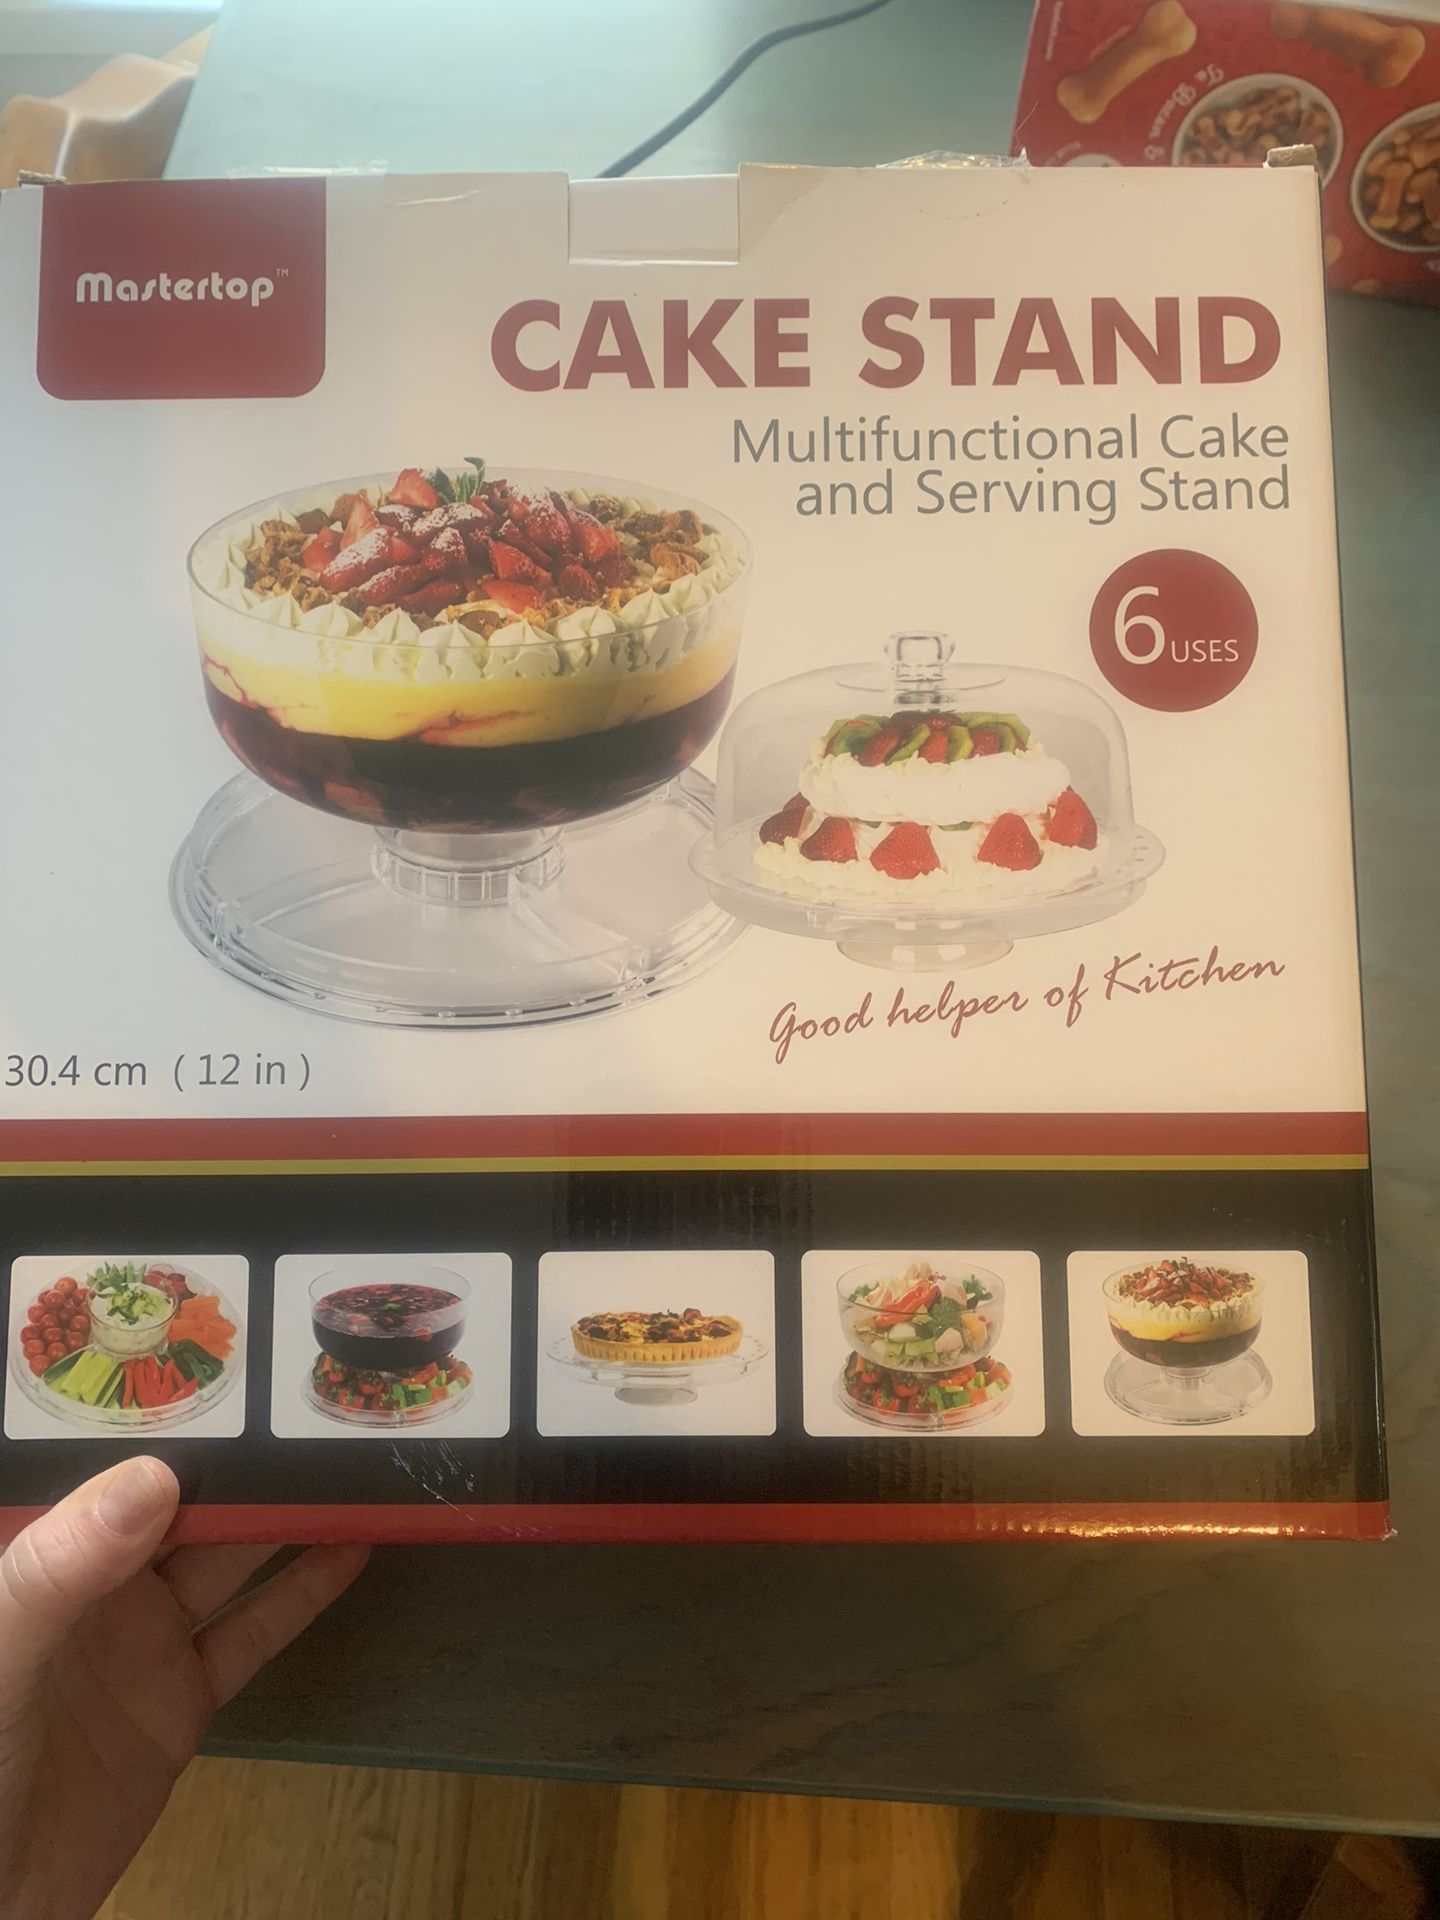 Master top Cake Stand